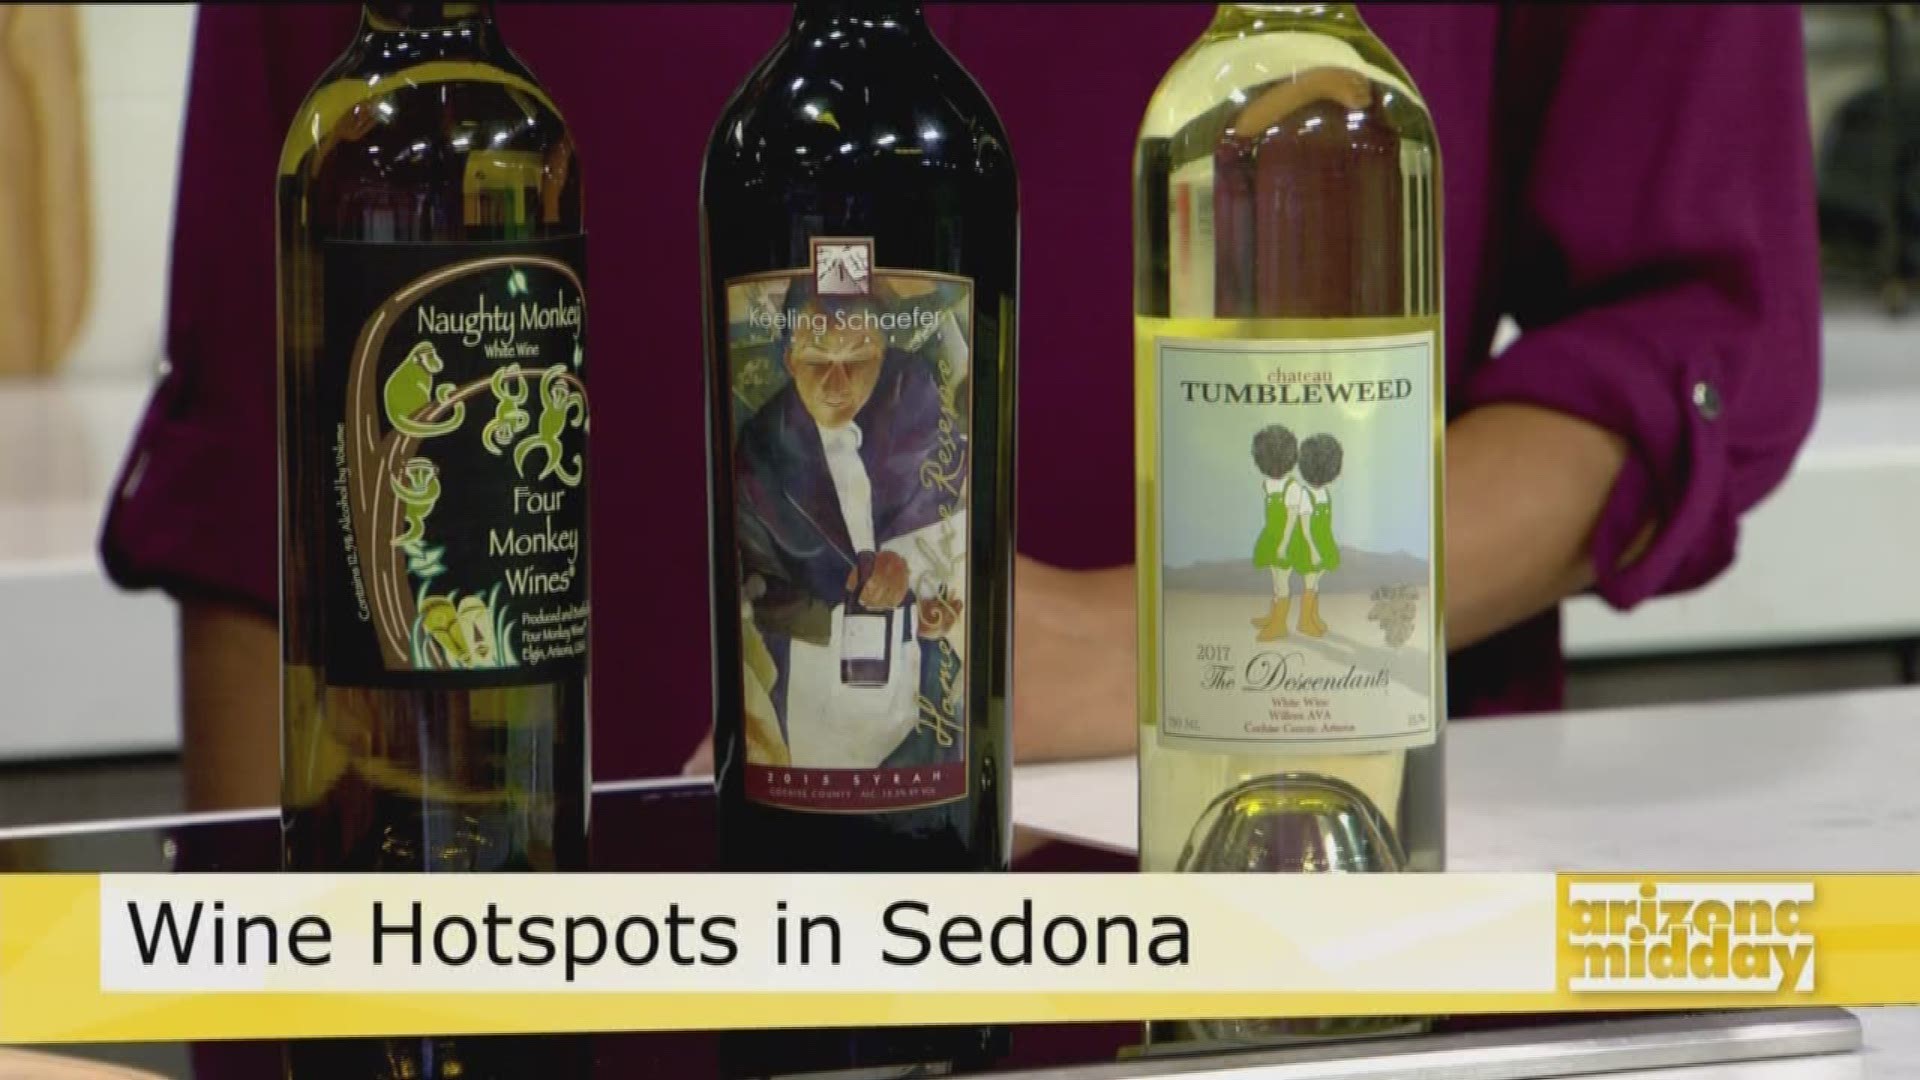 The wine scene is growing in Sedona, and Lauren and Johnathan Maldonado from Art of Wine are here to tell us all about it.